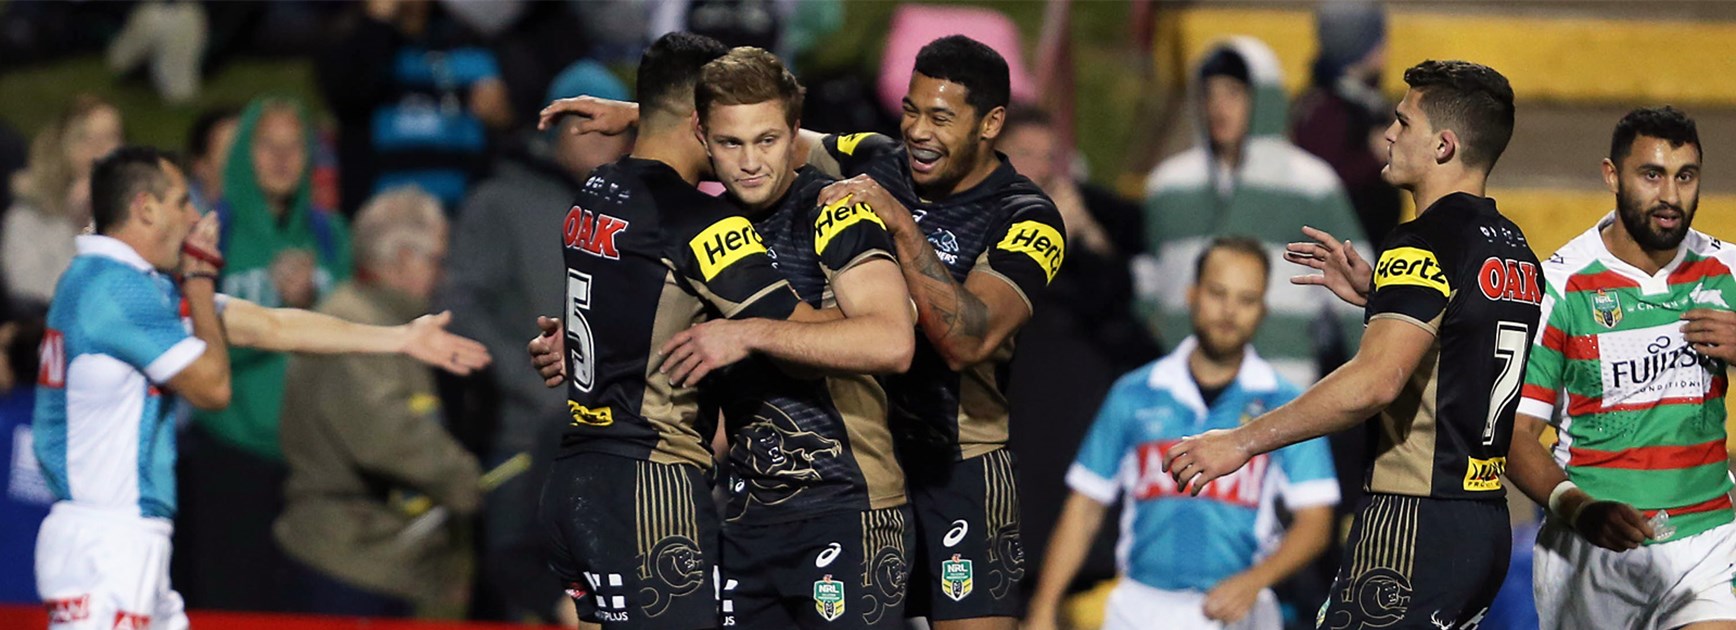 The Panthers celebrate a try against the Rabbitohs on Friday night.